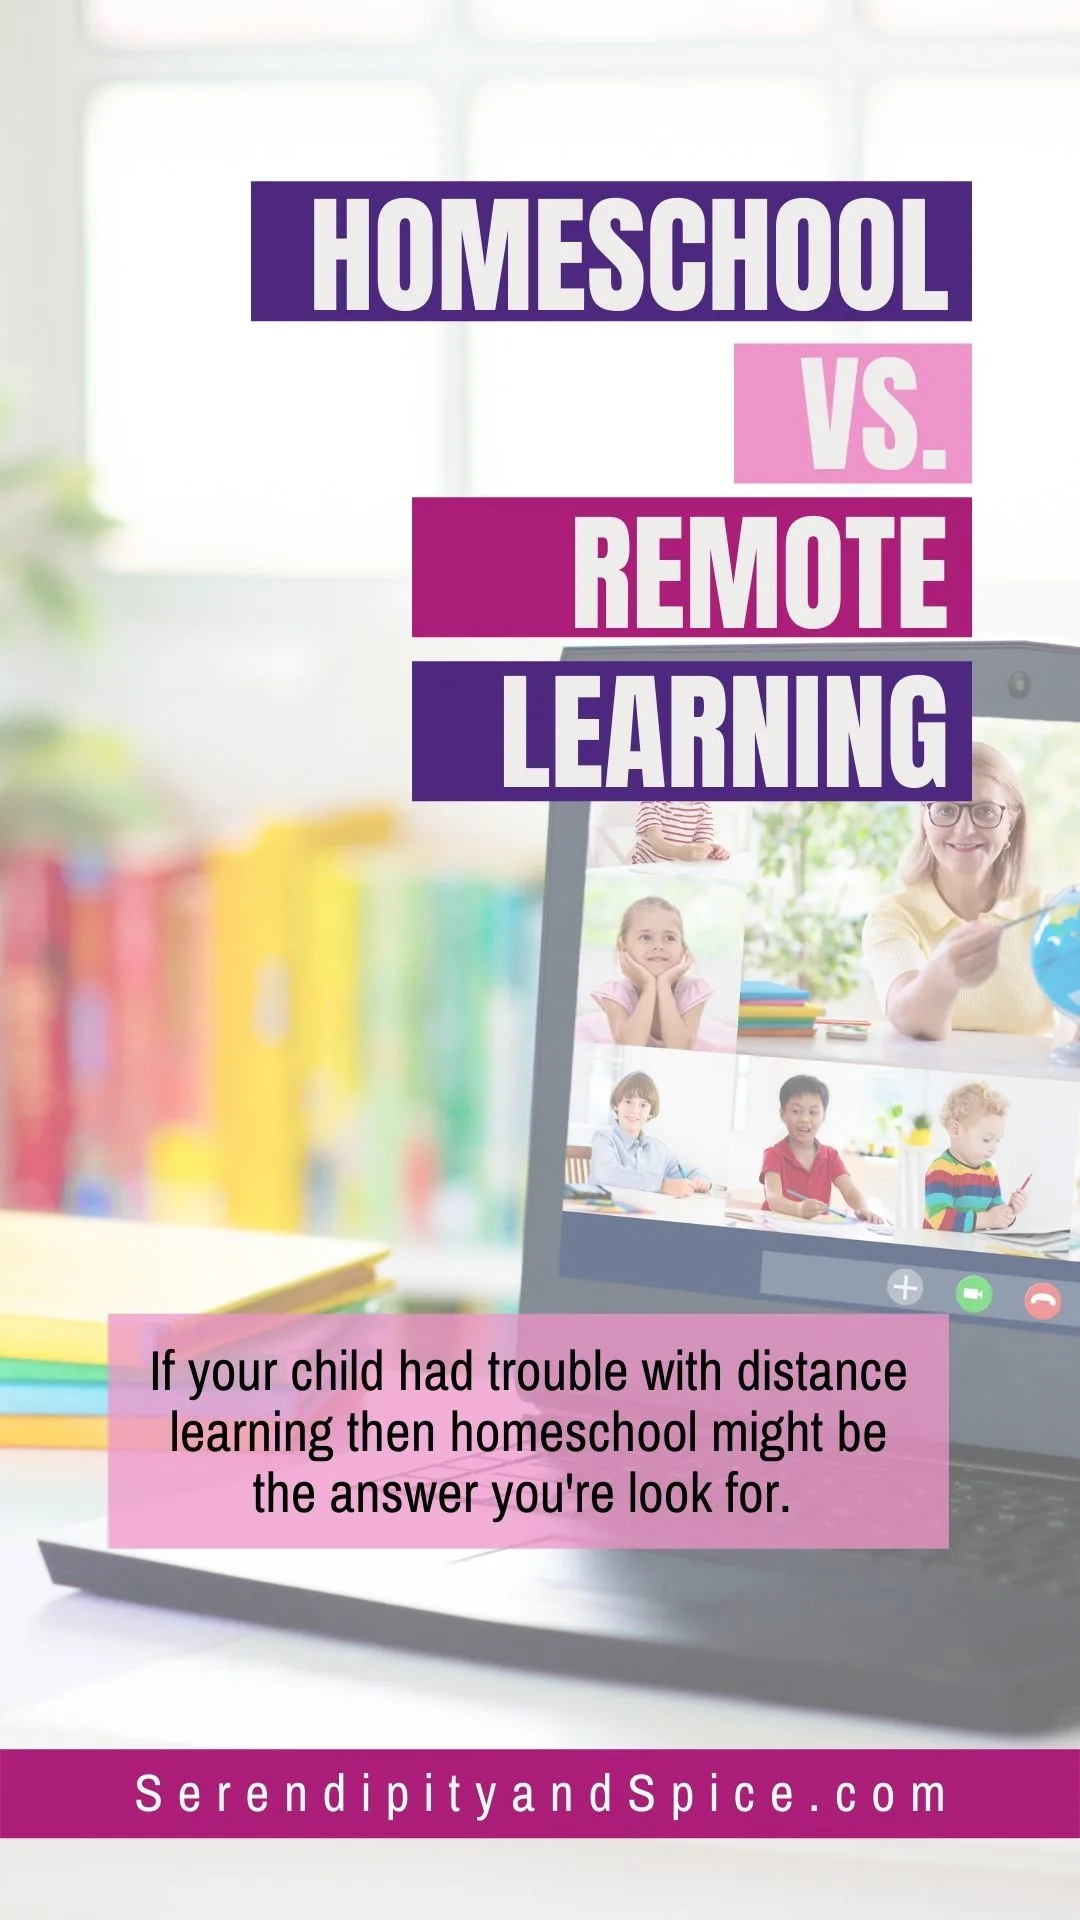 Remote learning is not the same as homeschool because it's too structured. If your child had trouble with distance learning then homeschool might be the answer you look for. Read on to learn the difference between homeschool and remote learning.